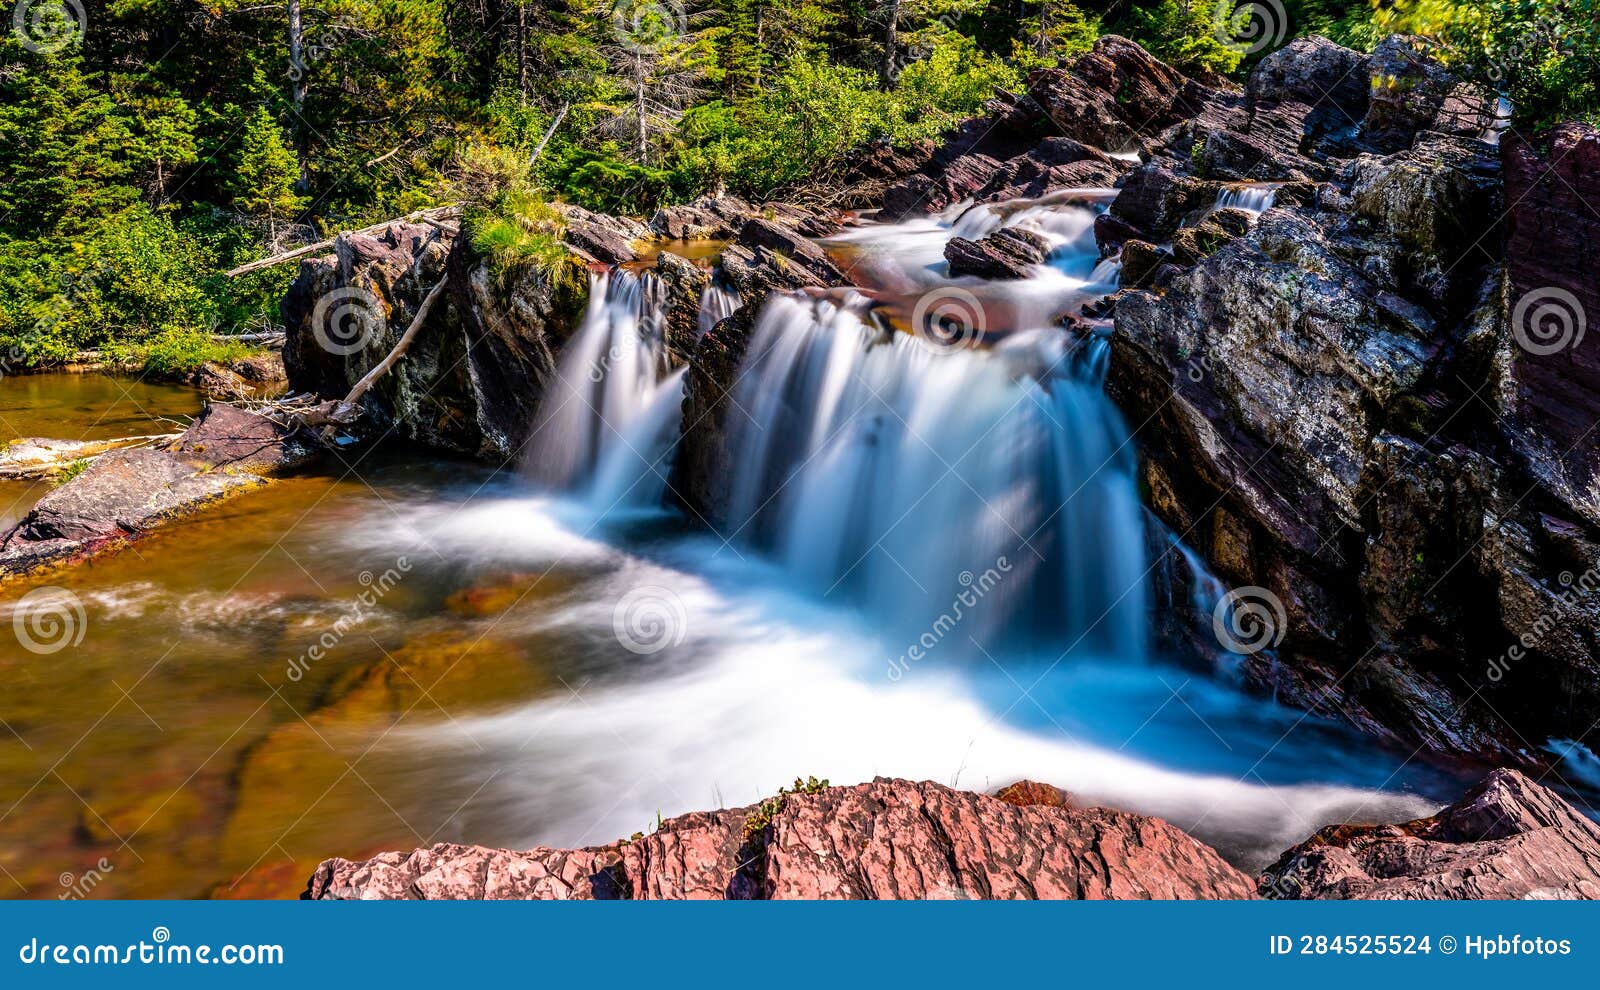 long exposure photo of the redrock falls in glacier national park